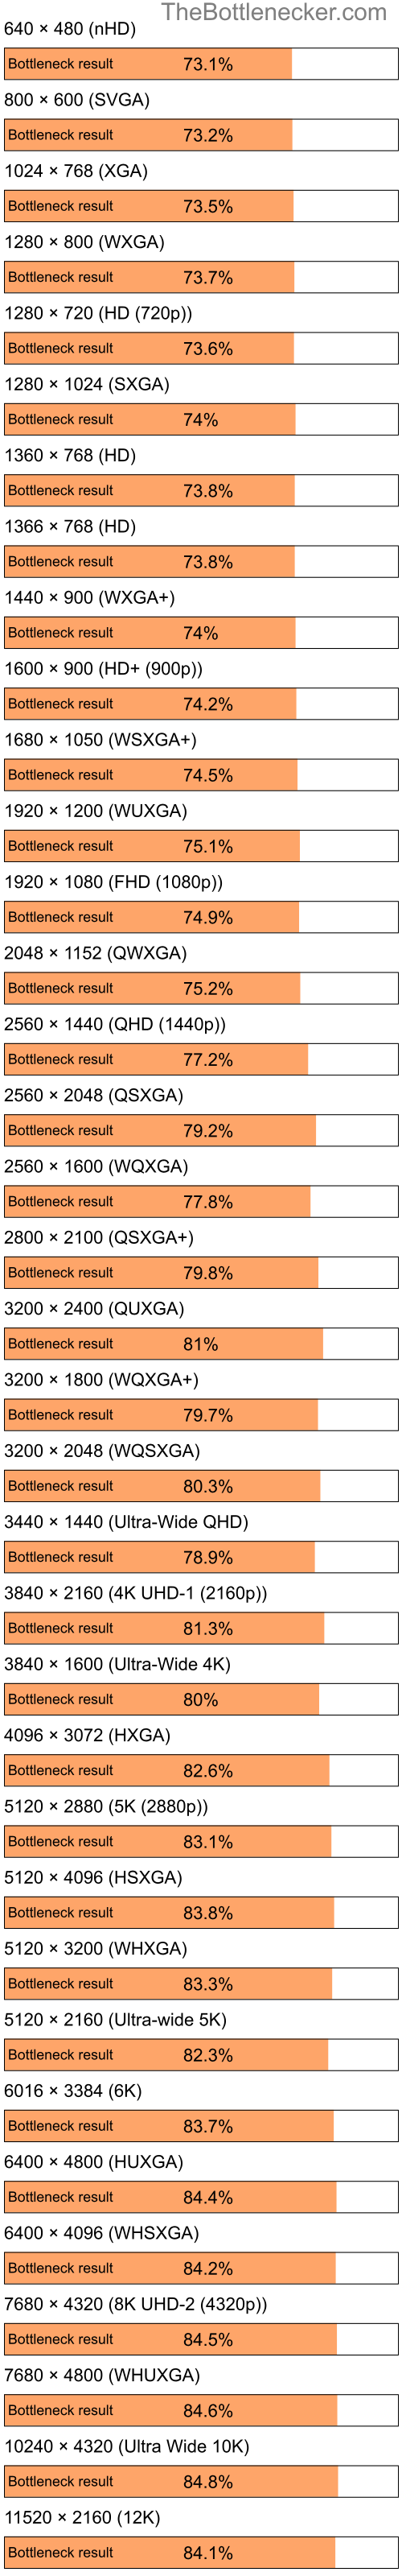 Bottleneck results by resolution for Intel Pentium 4 and NVIDIA GeForce 6150 LE in General Tasks